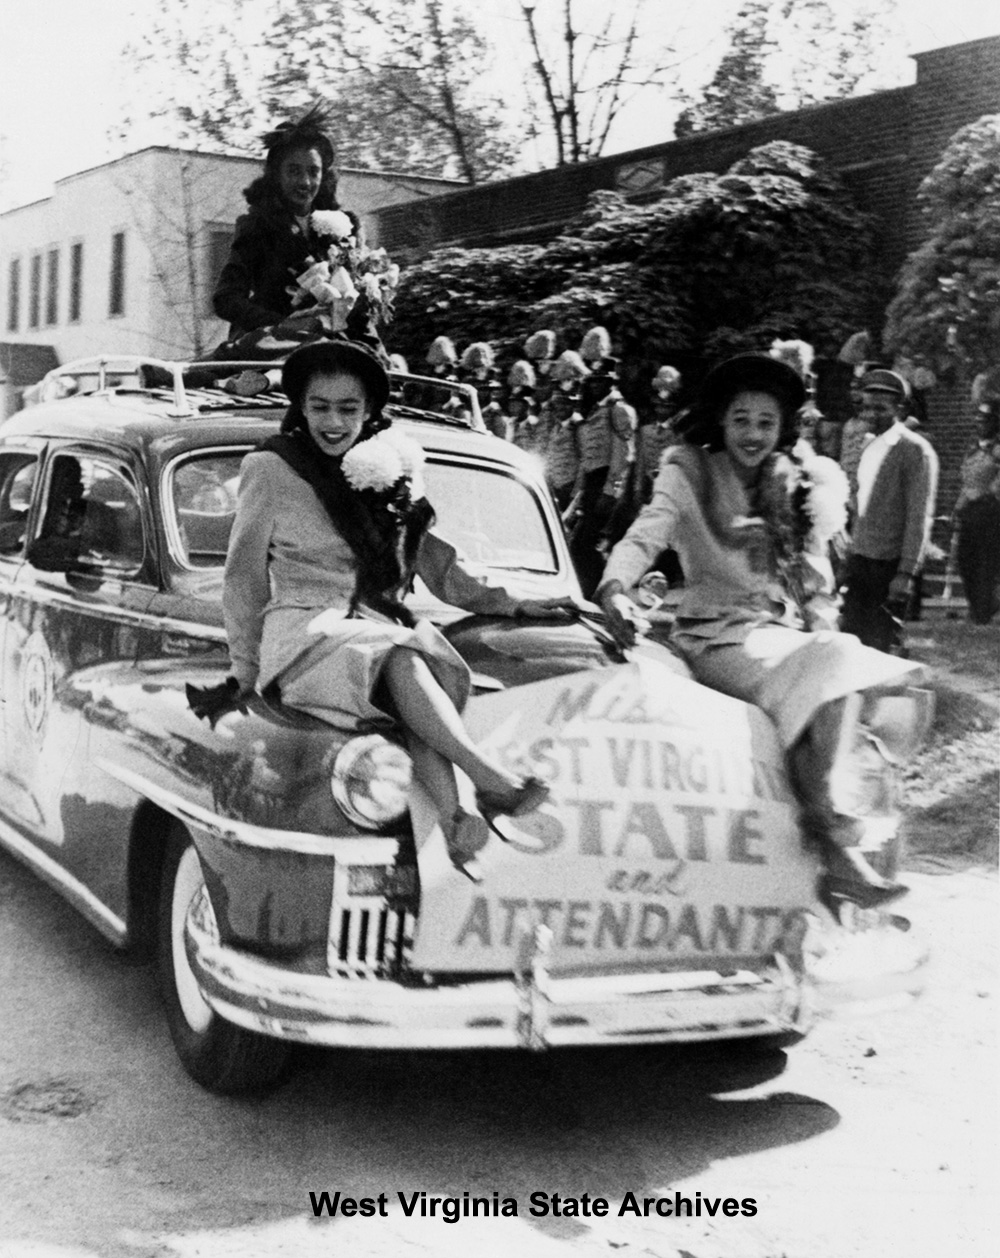 Homecoming parade, Miss West Virginia State and Attendants, 1948. Charles Jeffreys Collection, West Virginia State Archives (345108)